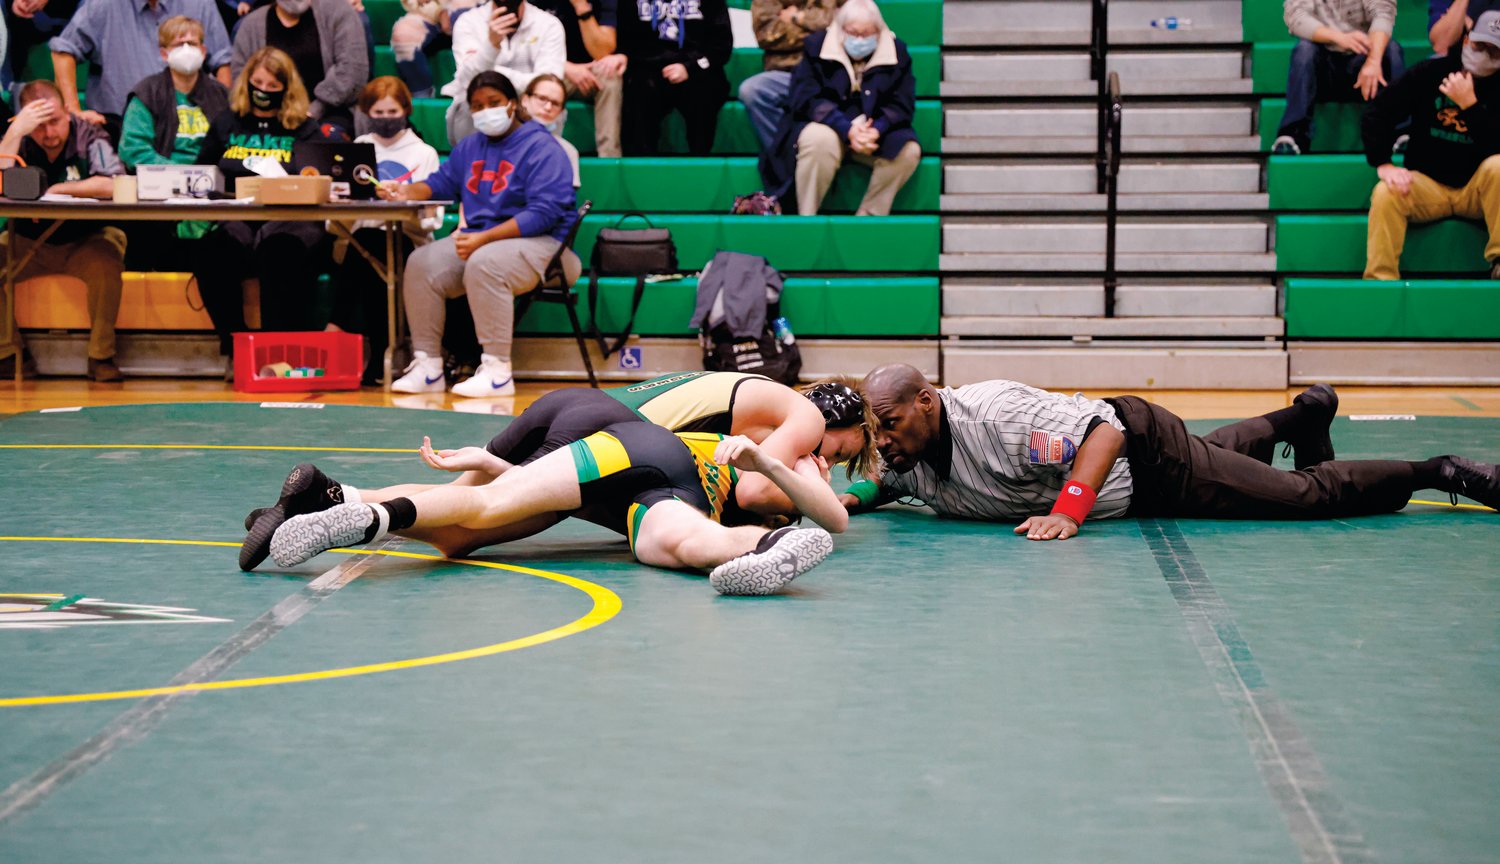 Northwood's Coltrane Northington (top) took advantage of a swift first-period takedown to pin Leo Wise of Eastern Alamance in the first period of their 120-pound bout last Thursday. The Chargers won the come-from-behind match, 42-36.